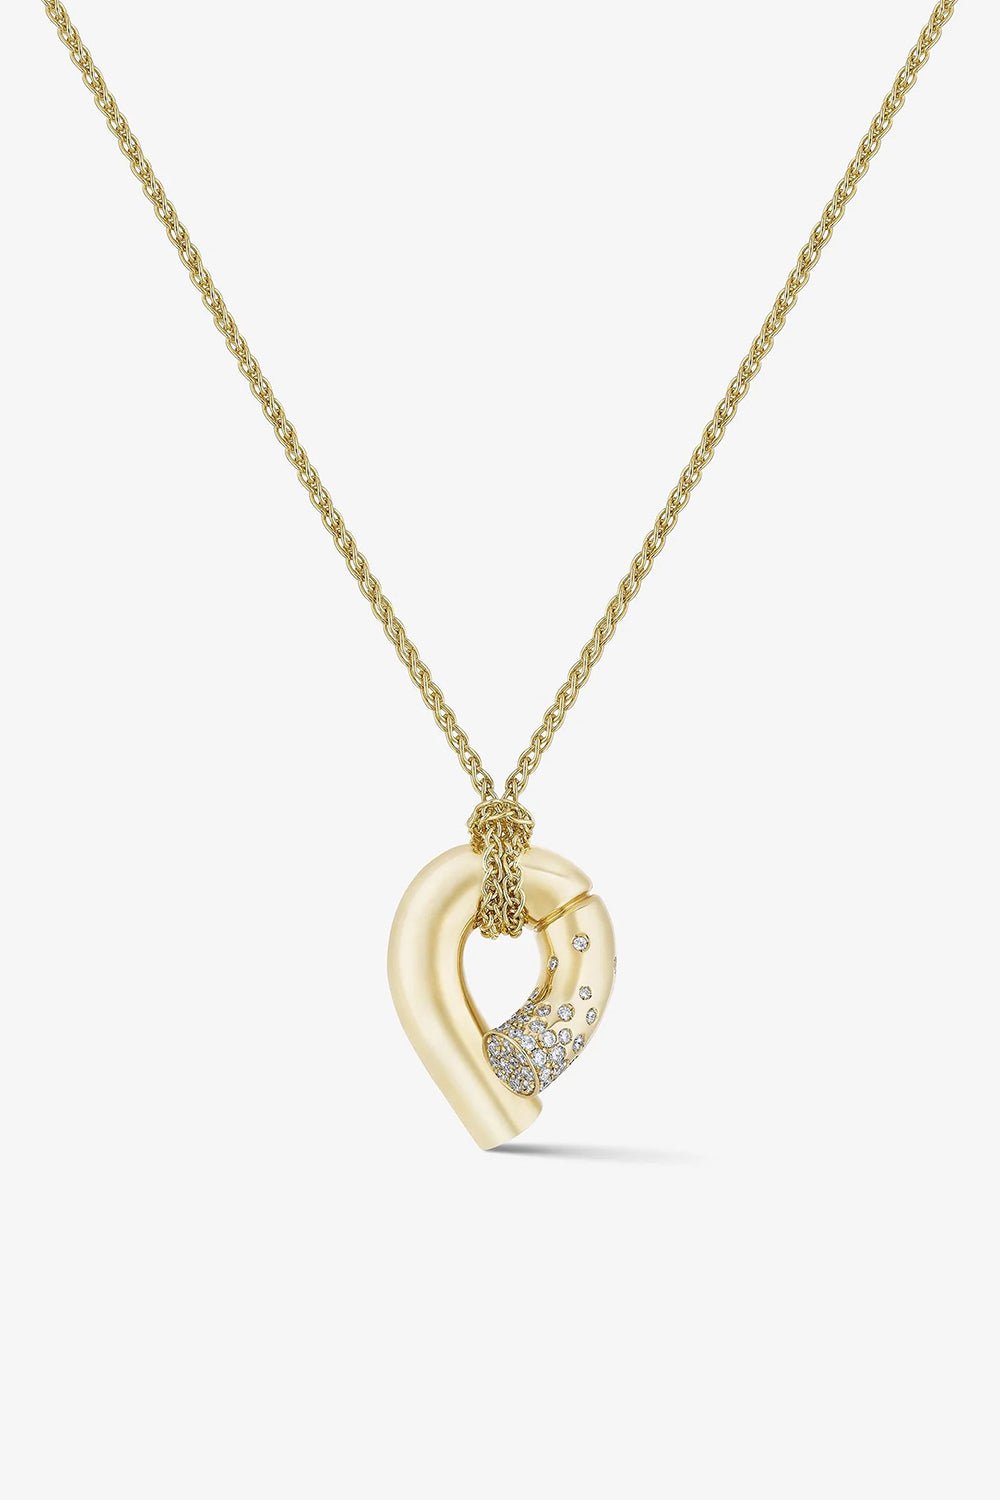 TABAYER-Oera Pave Pendant Necklace-YELLOW GOLD